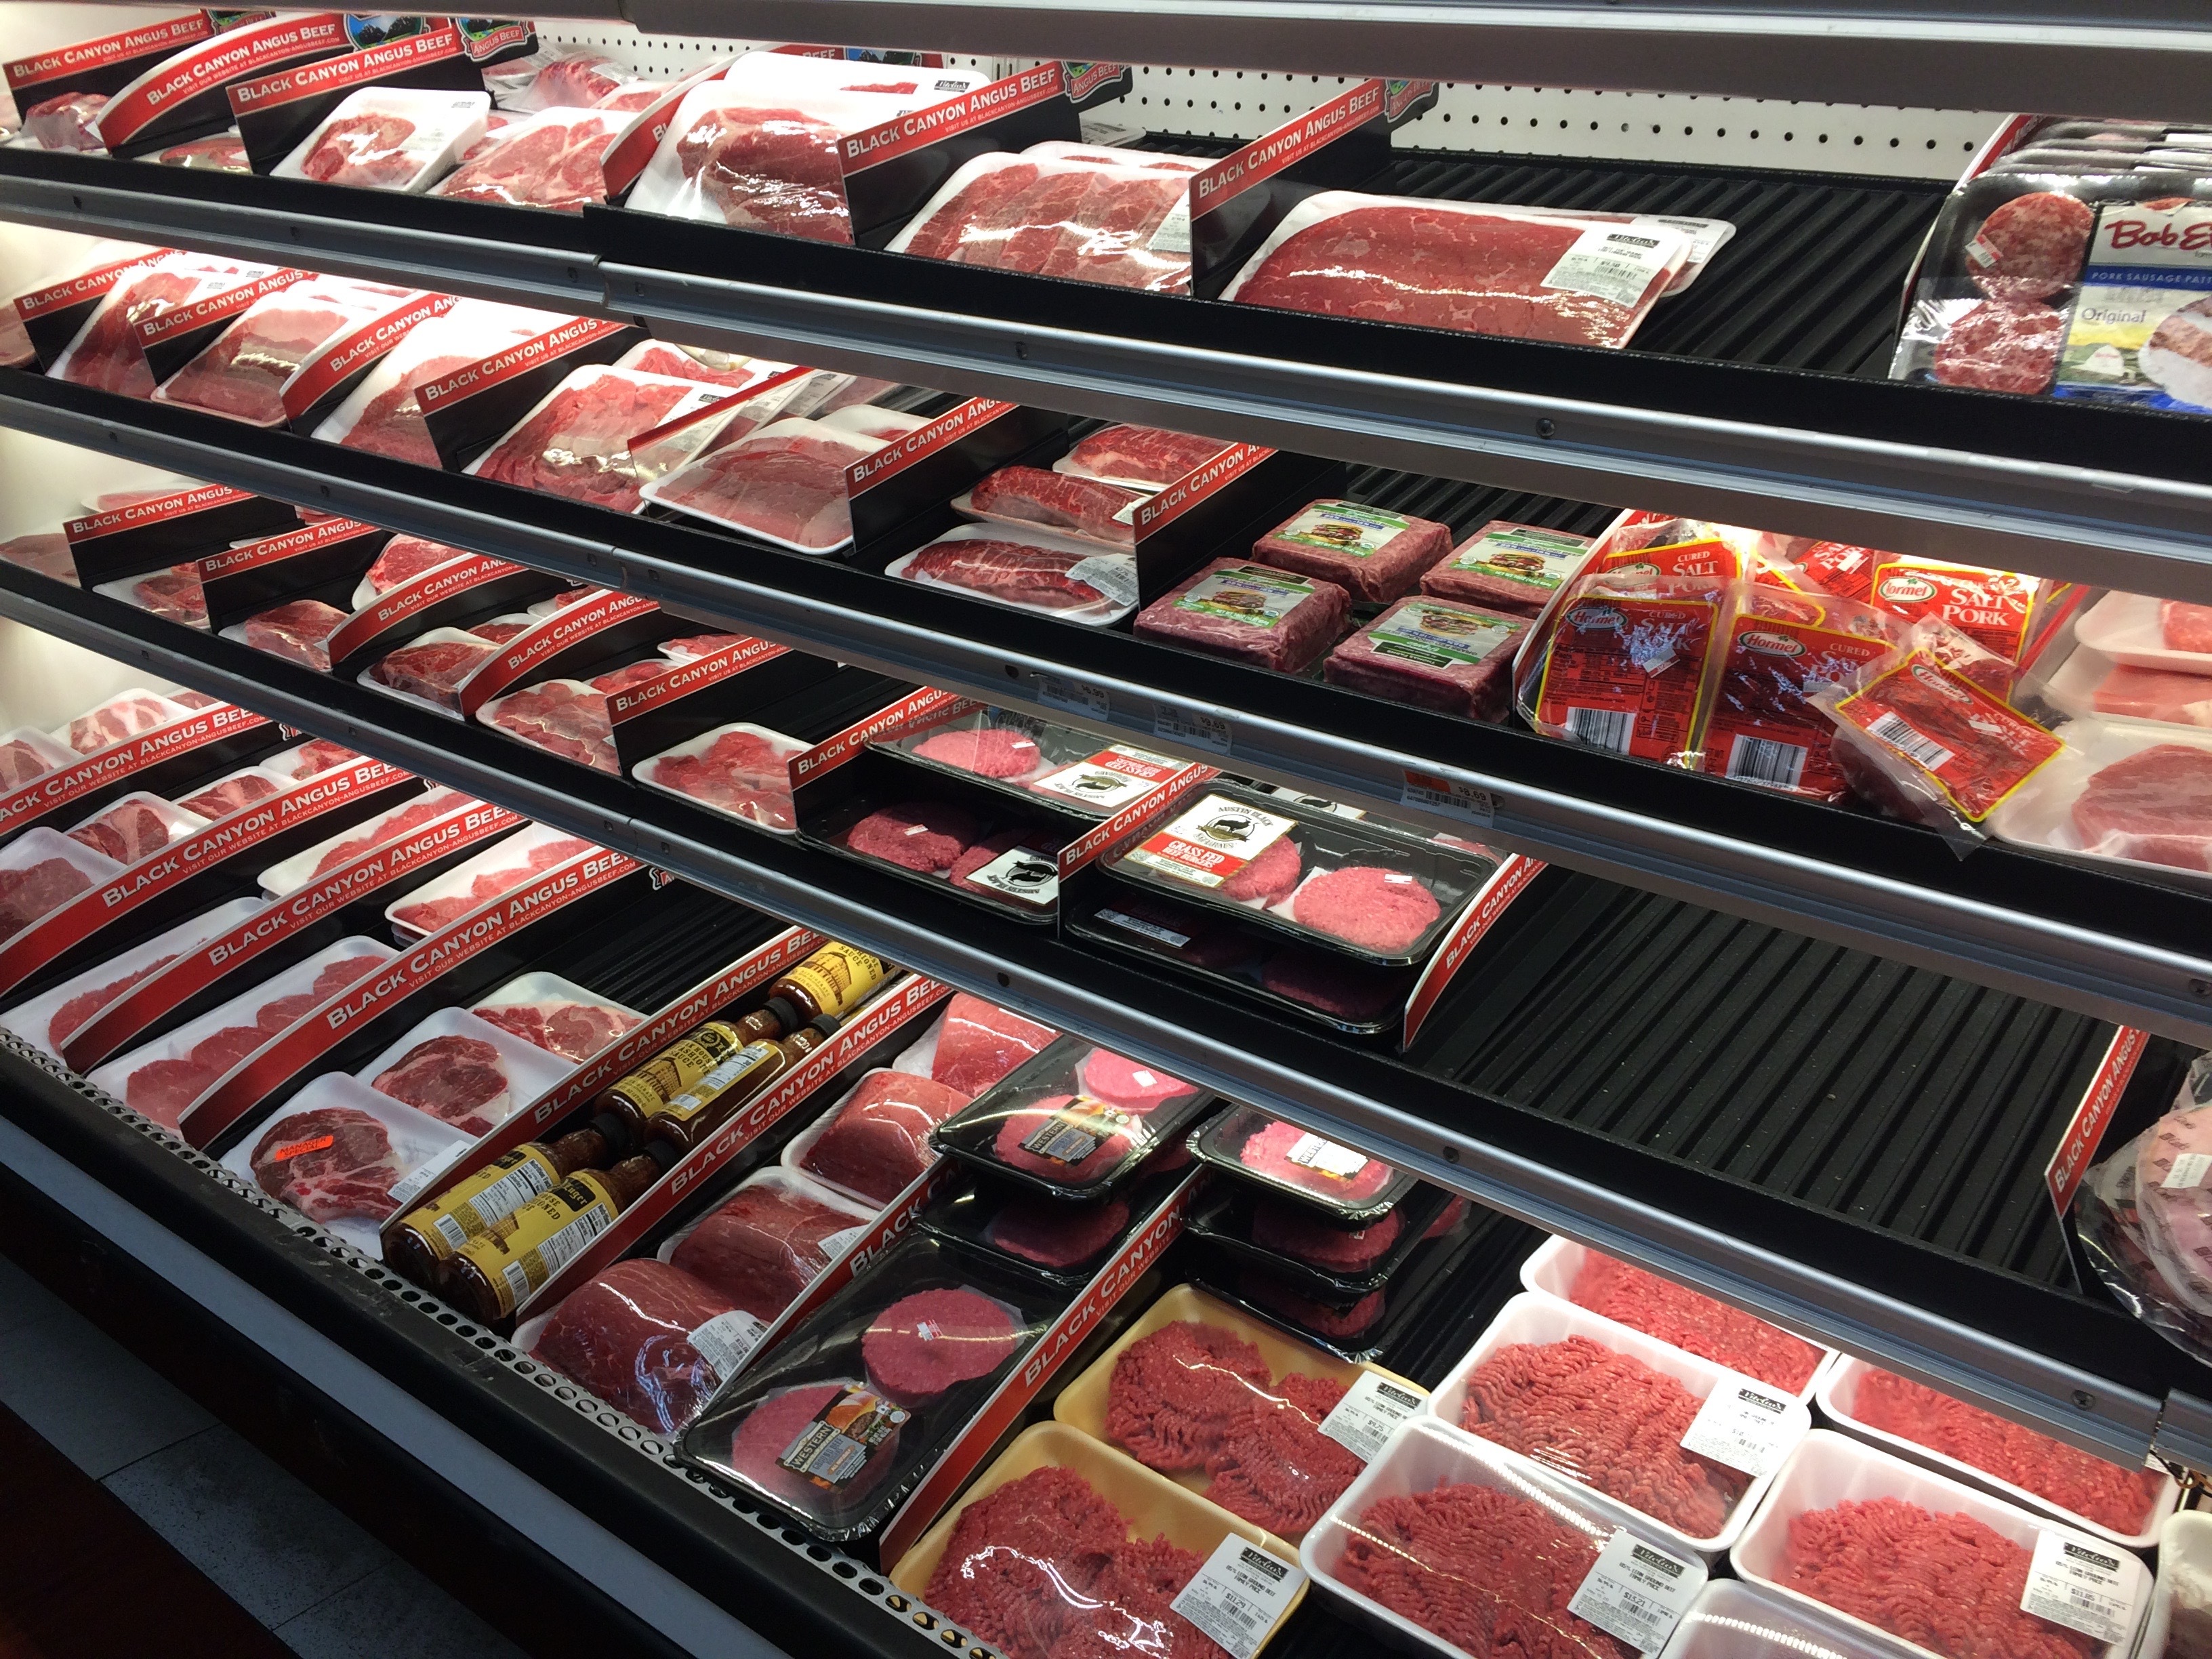 Meat sales reach record highs in 2020, increasing by 19.2%